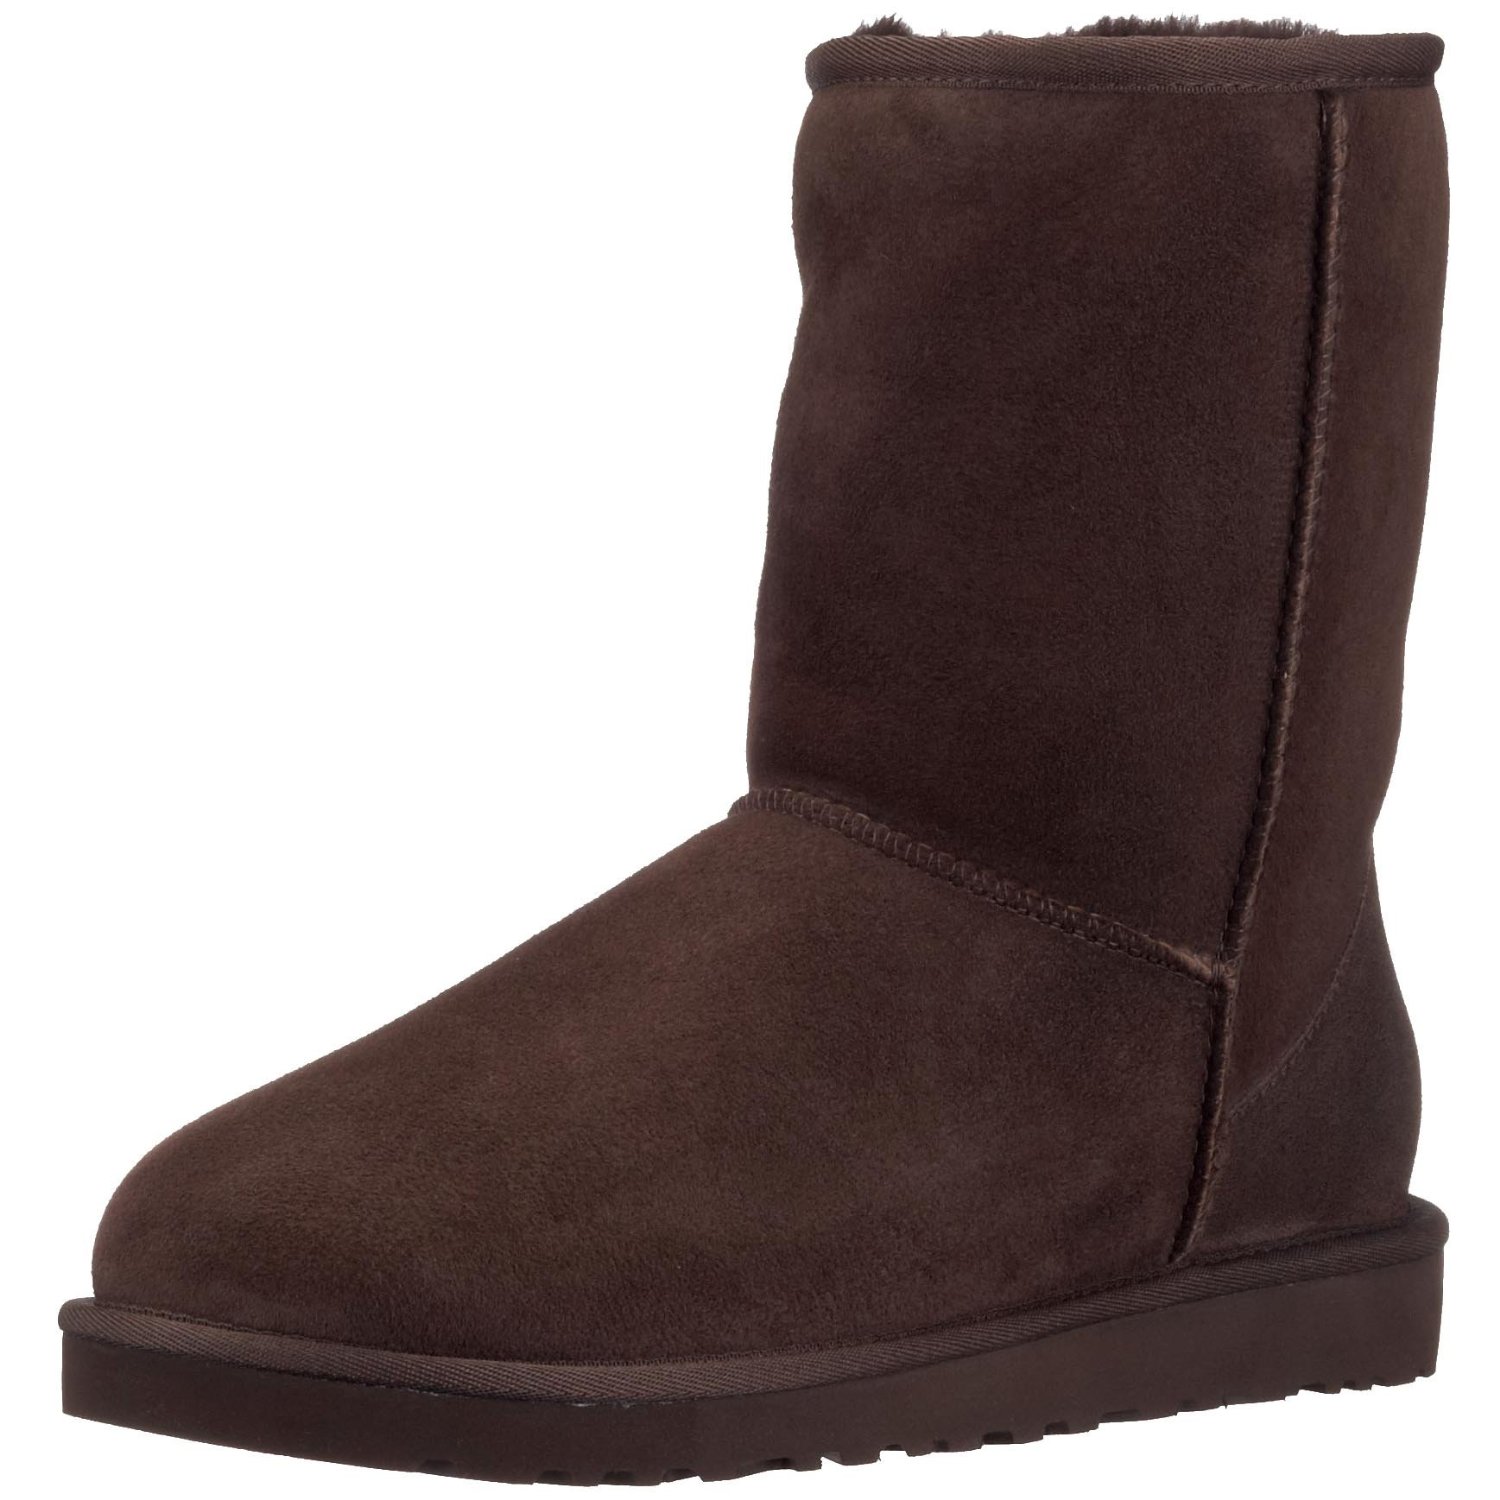 best ugg boots for women – Latest Trend Fashion